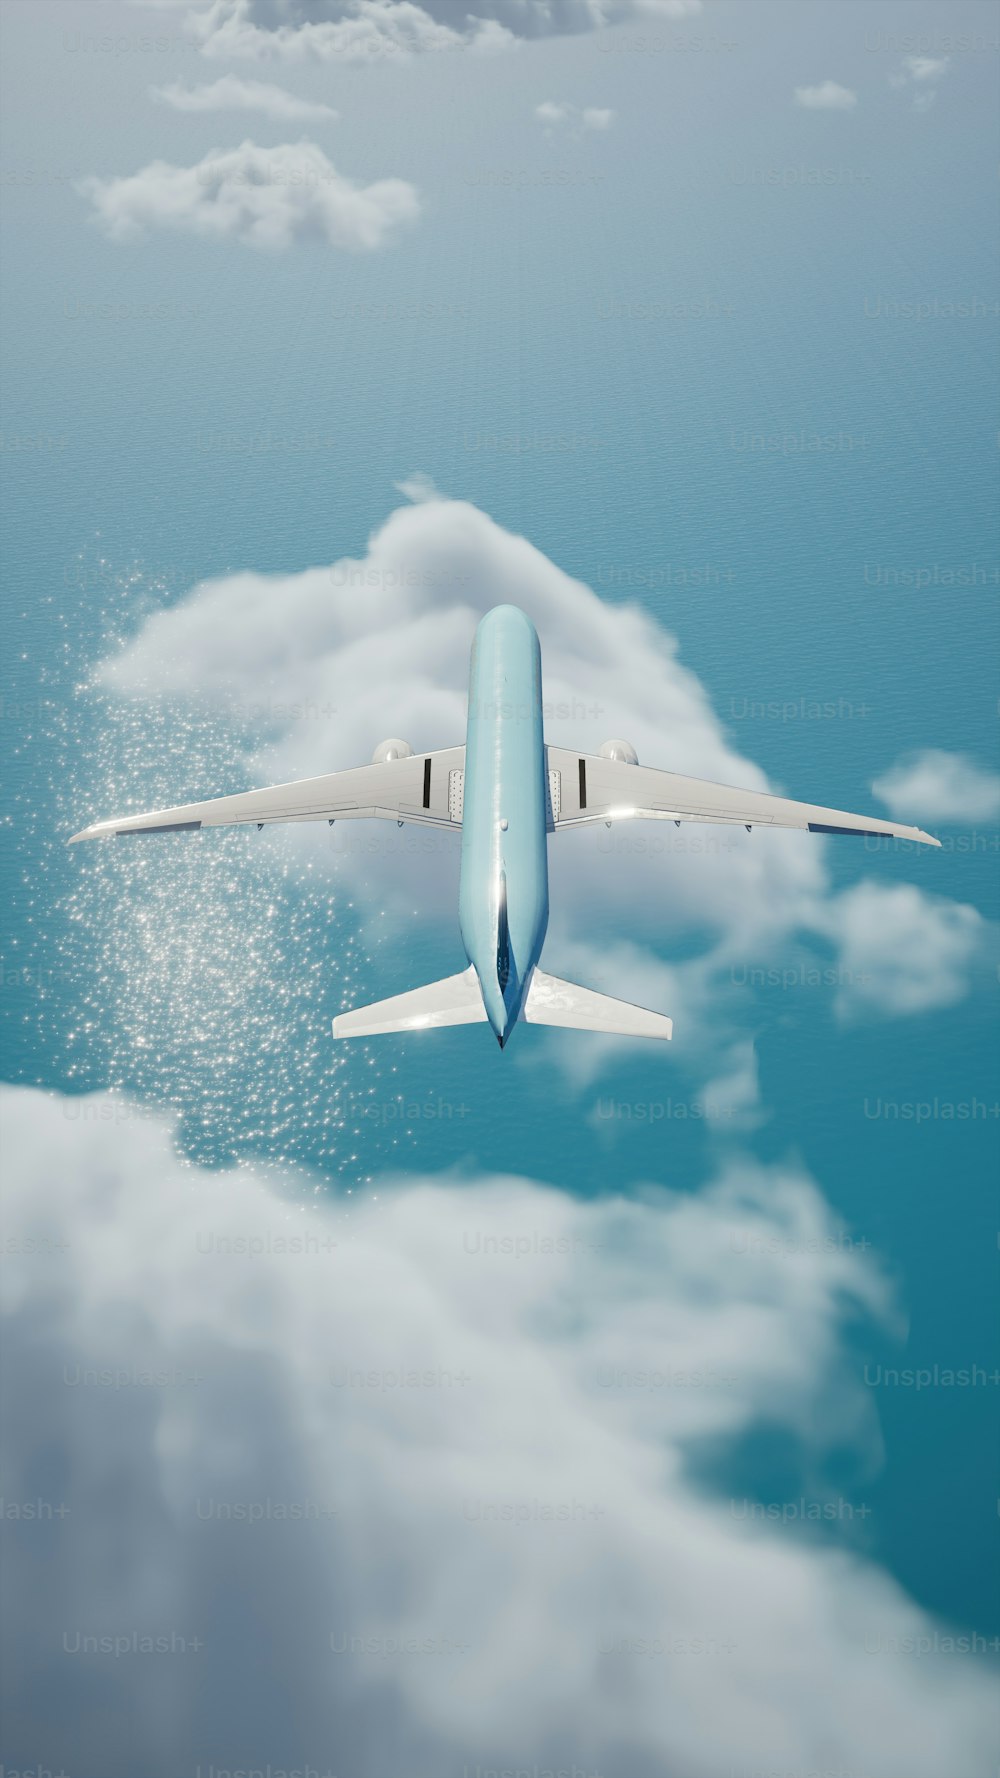 a blue and white airplane flying in the sky